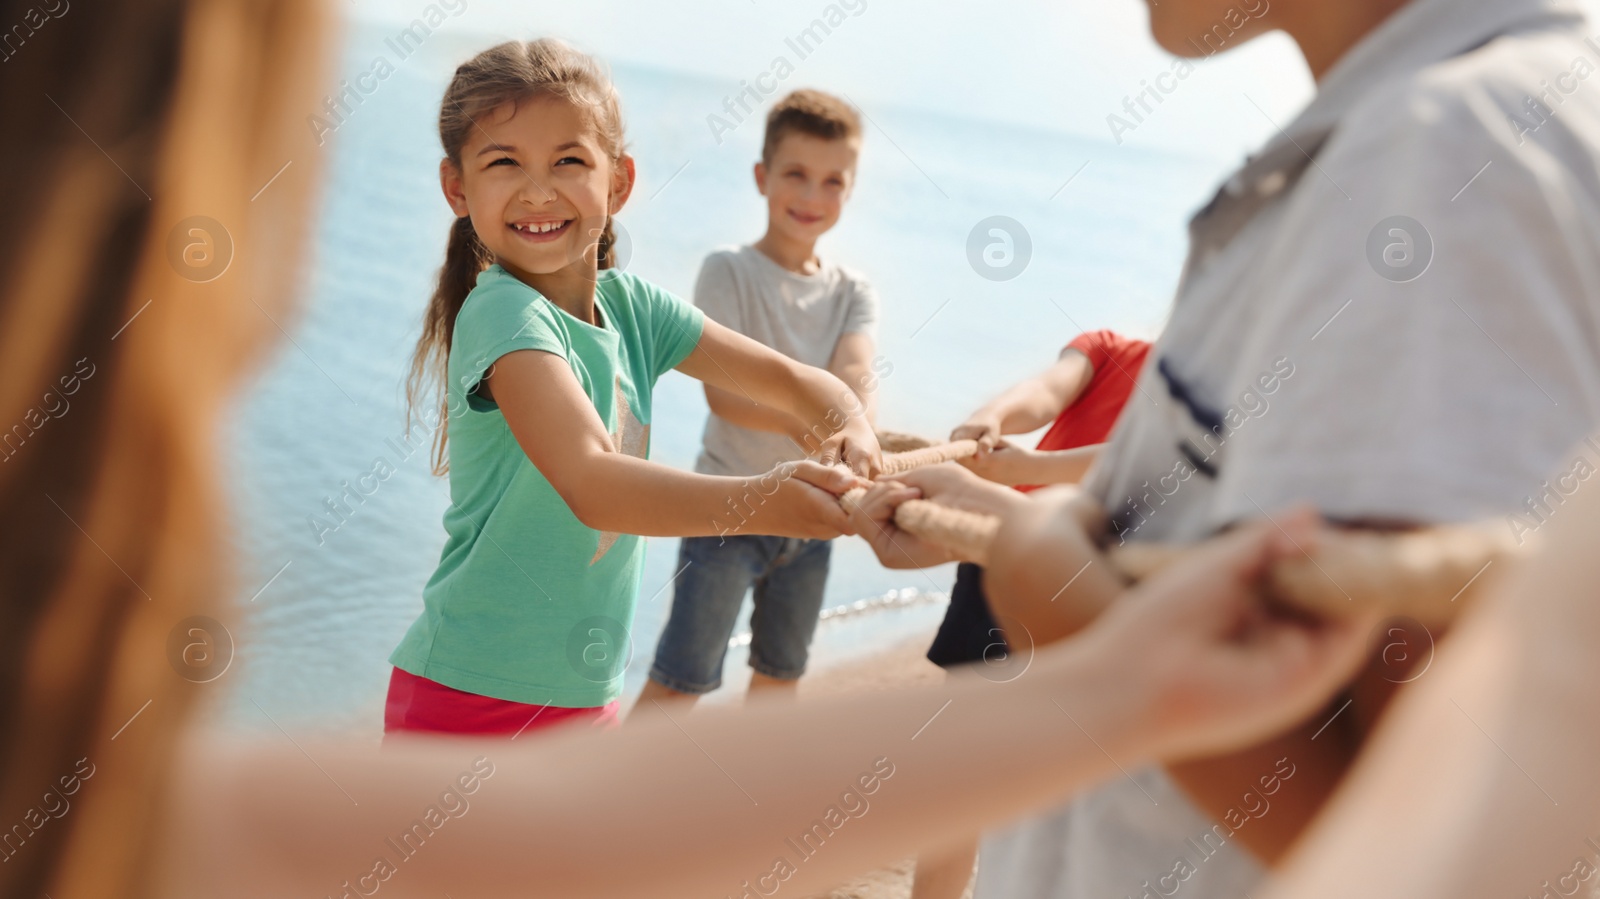 Image of Cute little children playing tug of war game near river on sunny day